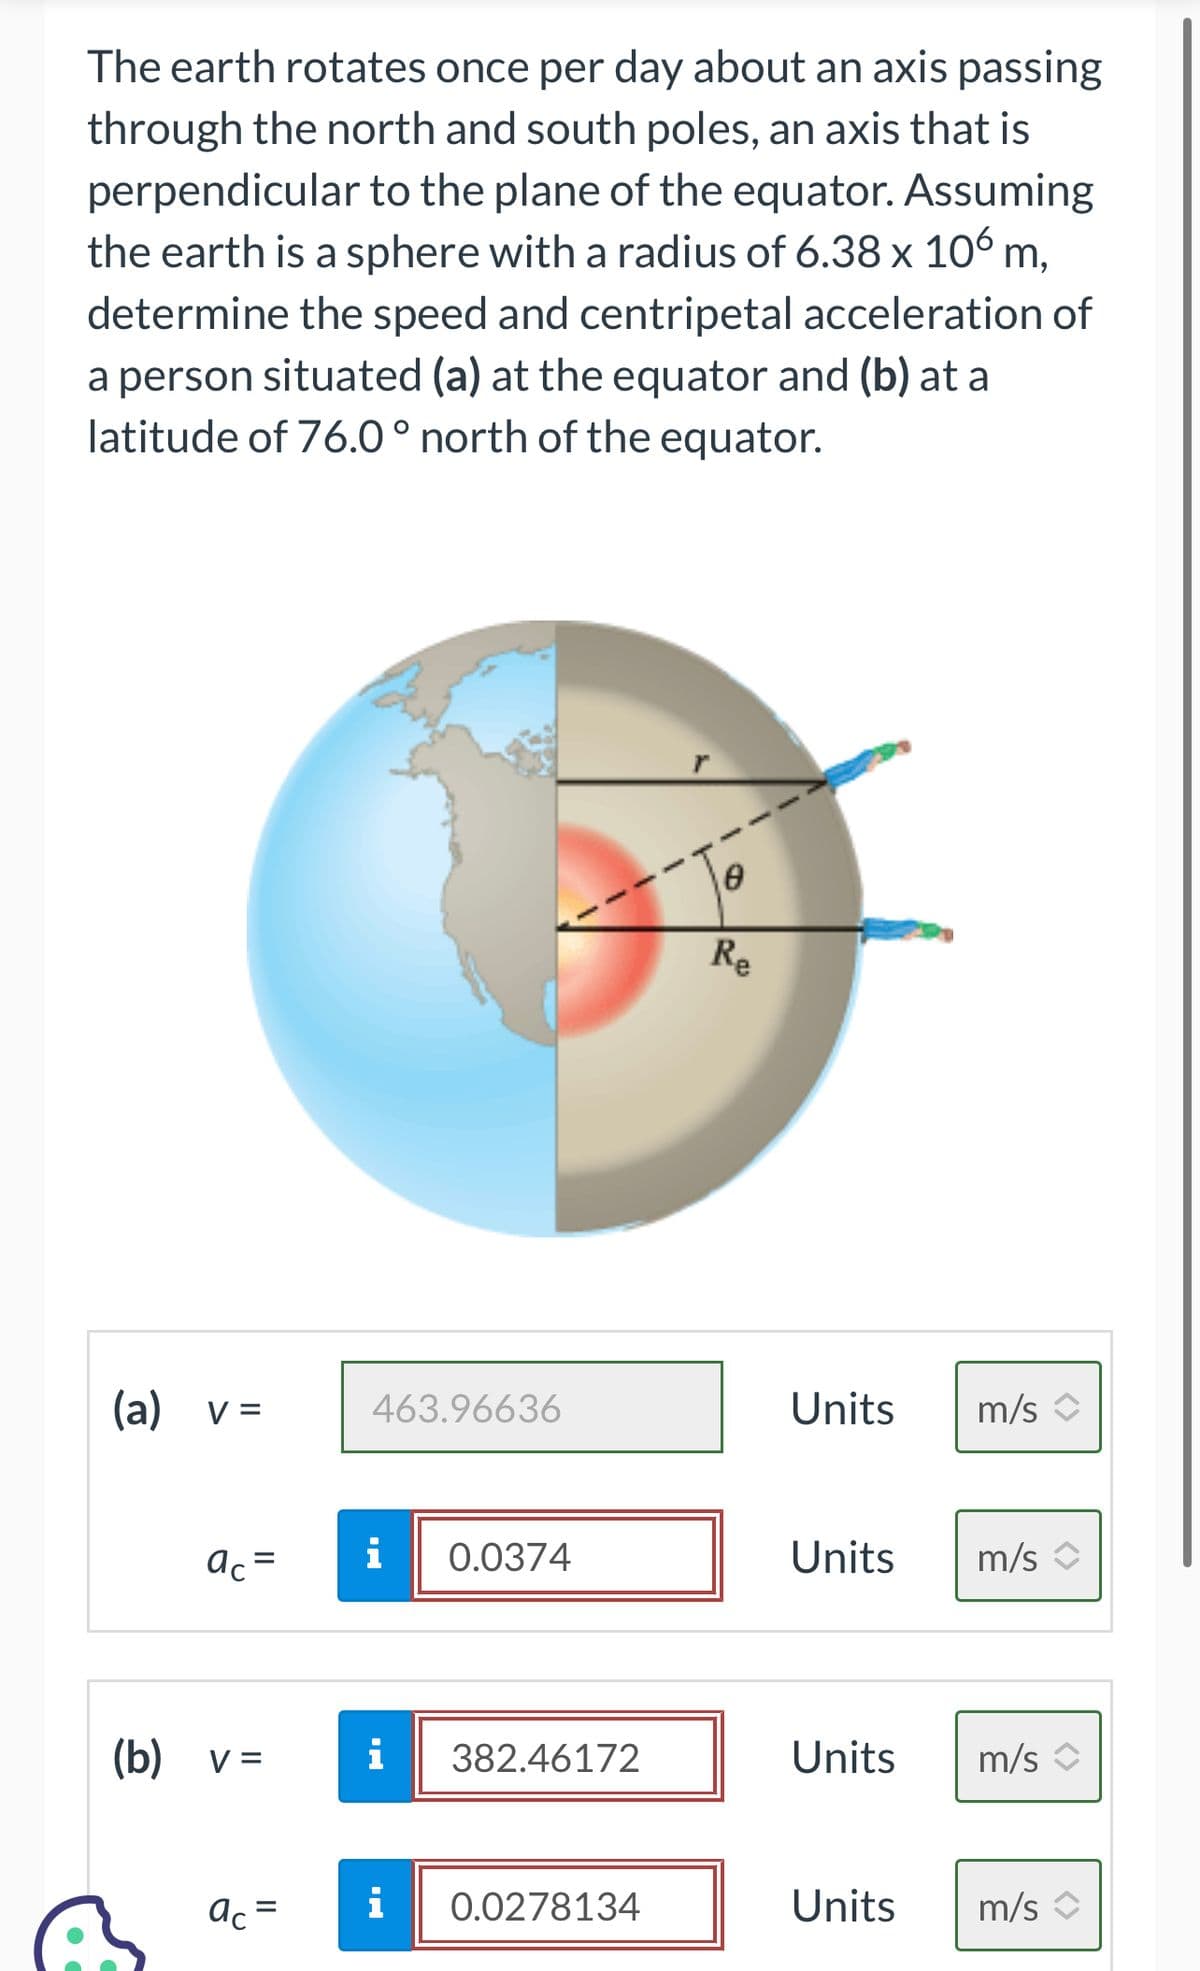 The earth rotates once per day about an axis passing
through the north and south poles, an axis that is
perpendicular to the plane of the equator. Assuming
the earth is a sphere with a radius of 6.38 x 106 m,
determine the speed and centripetal acceleration of
a person situated (a) at the equator and (b) at a
latitude of 76.0° north of the equator.
(a) v =
ac =
(b) v =
ac =
463.96636
i 0.0374
i
i
382.46172
0.0278134
8
Re
Units m/s
Units m/s
Units
Units
m/s ↑
m/s